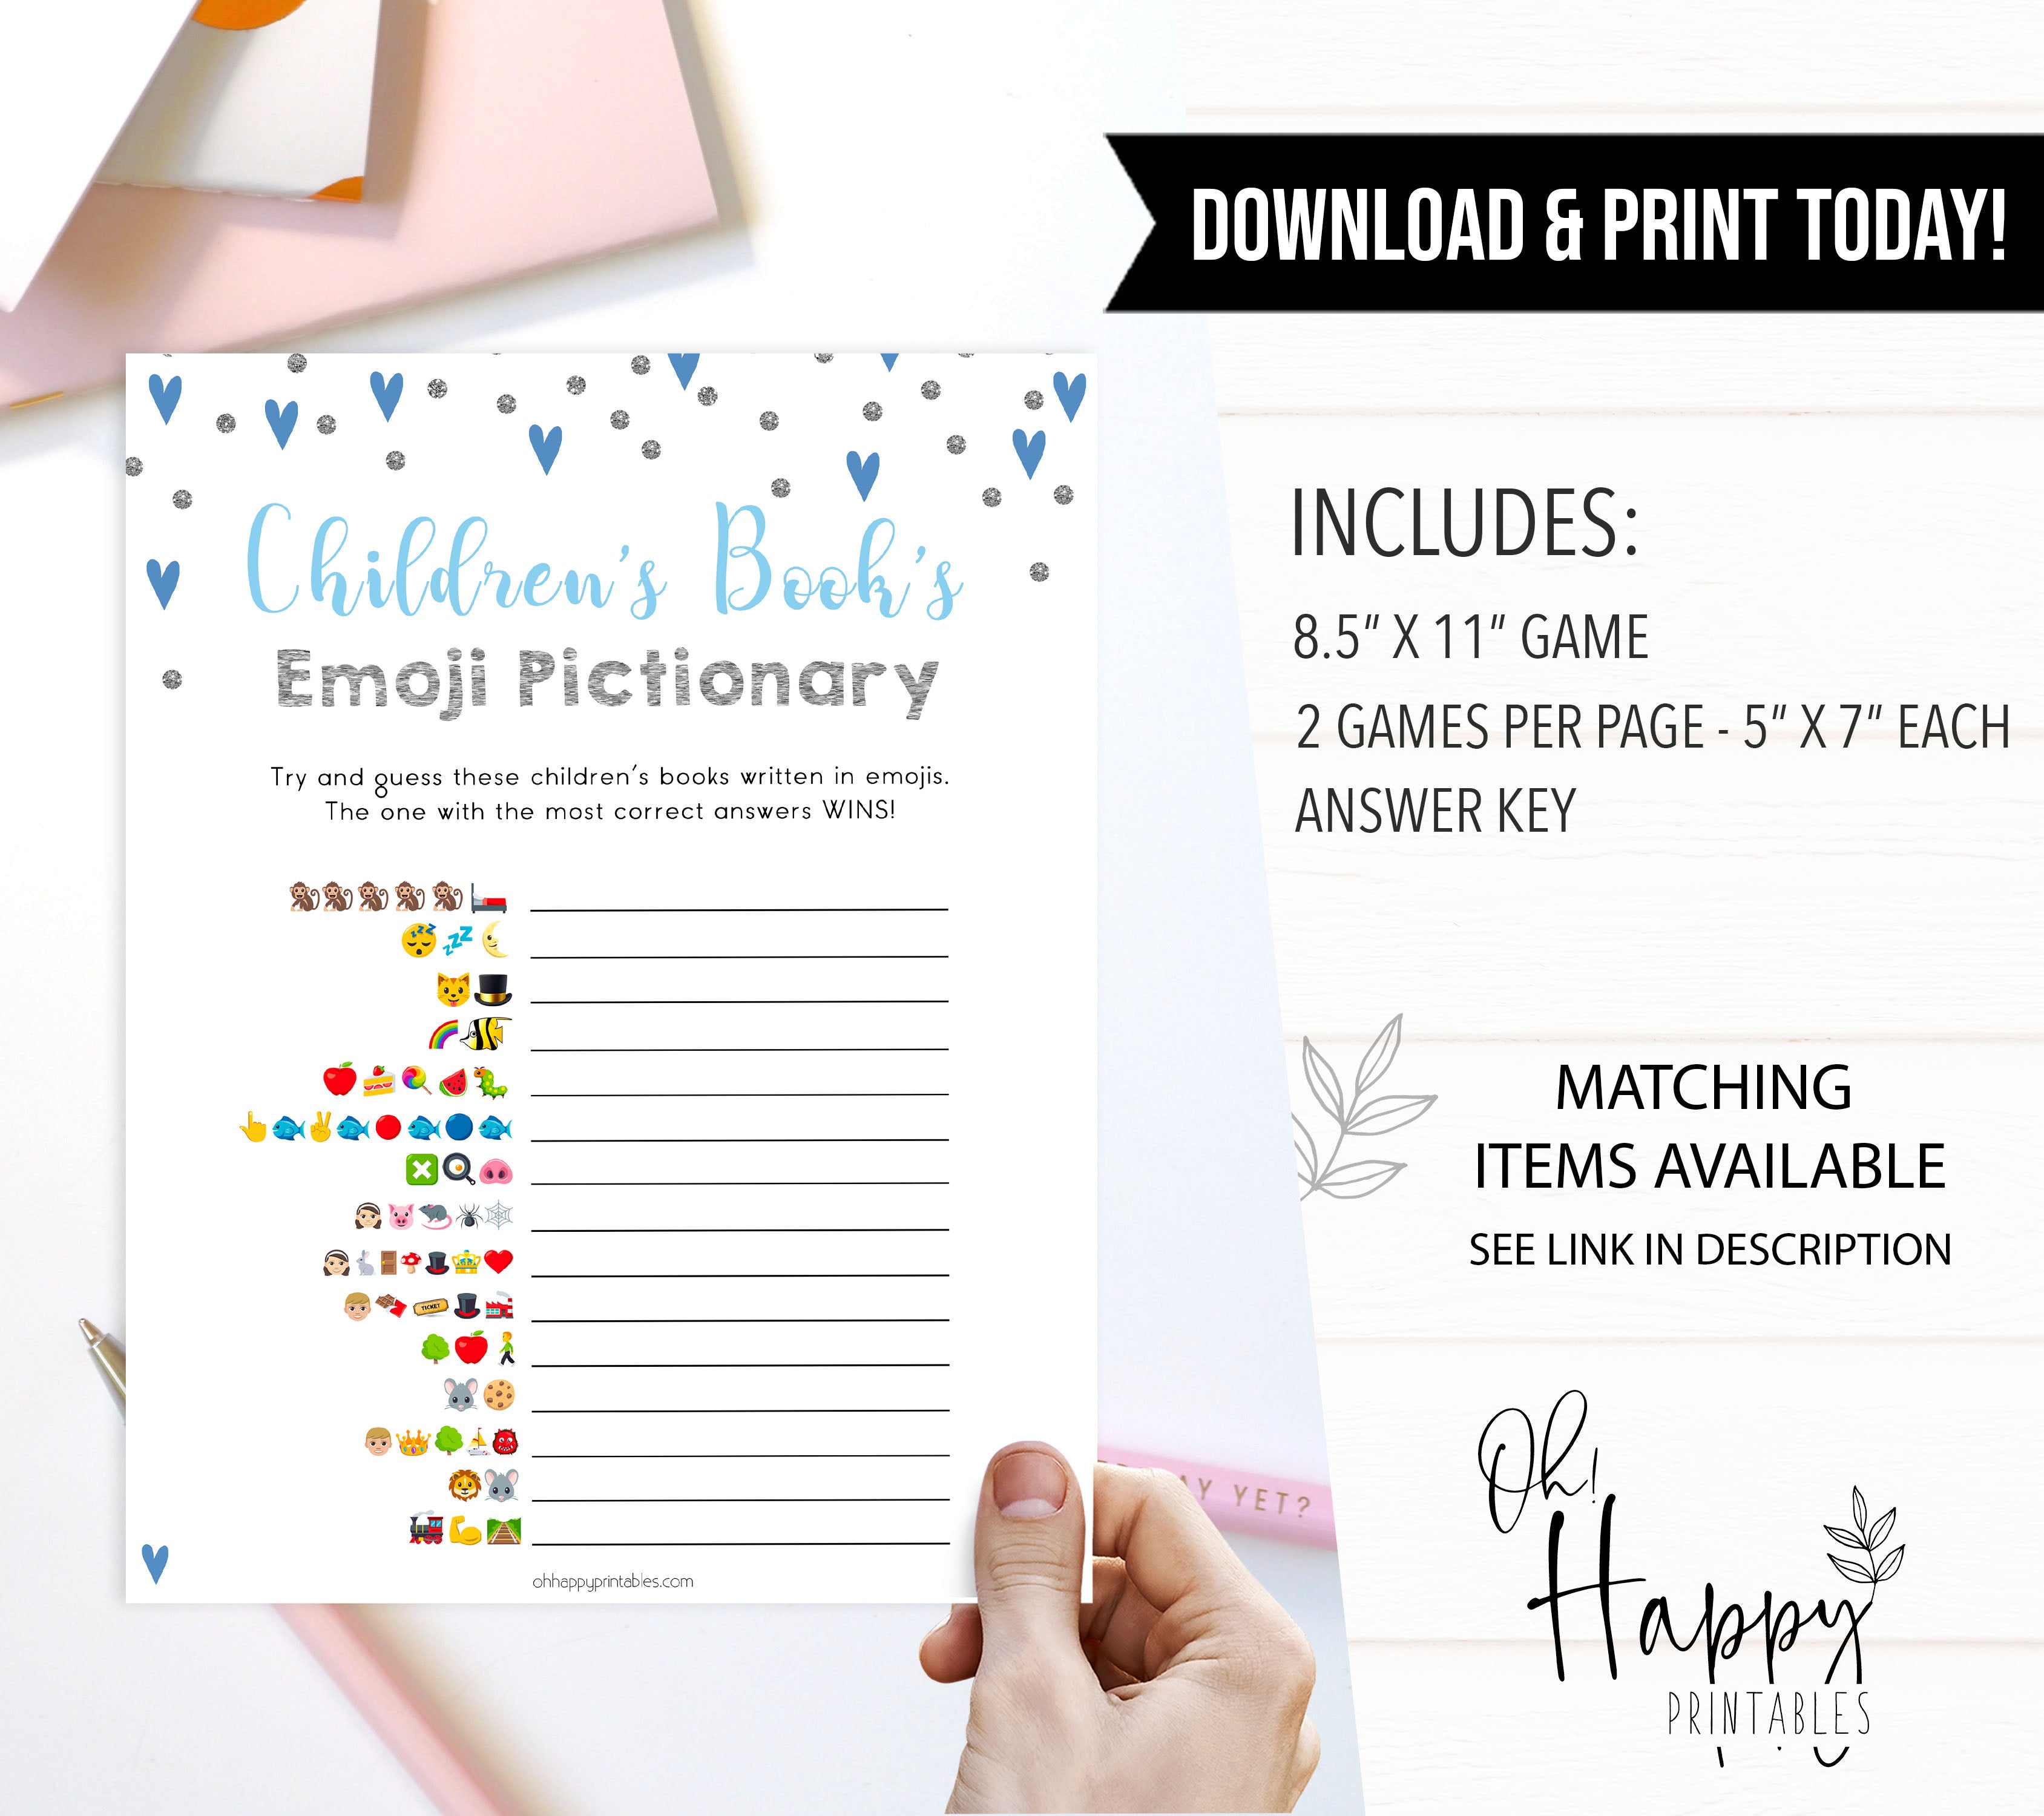 childrens books emoji pictionary game, Printable baby shower games, small blue hearts fun baby games, baby shower games, fun baby shower ideas, top baby shower ideas, silver baby shower, blue hearts baby shower ideas